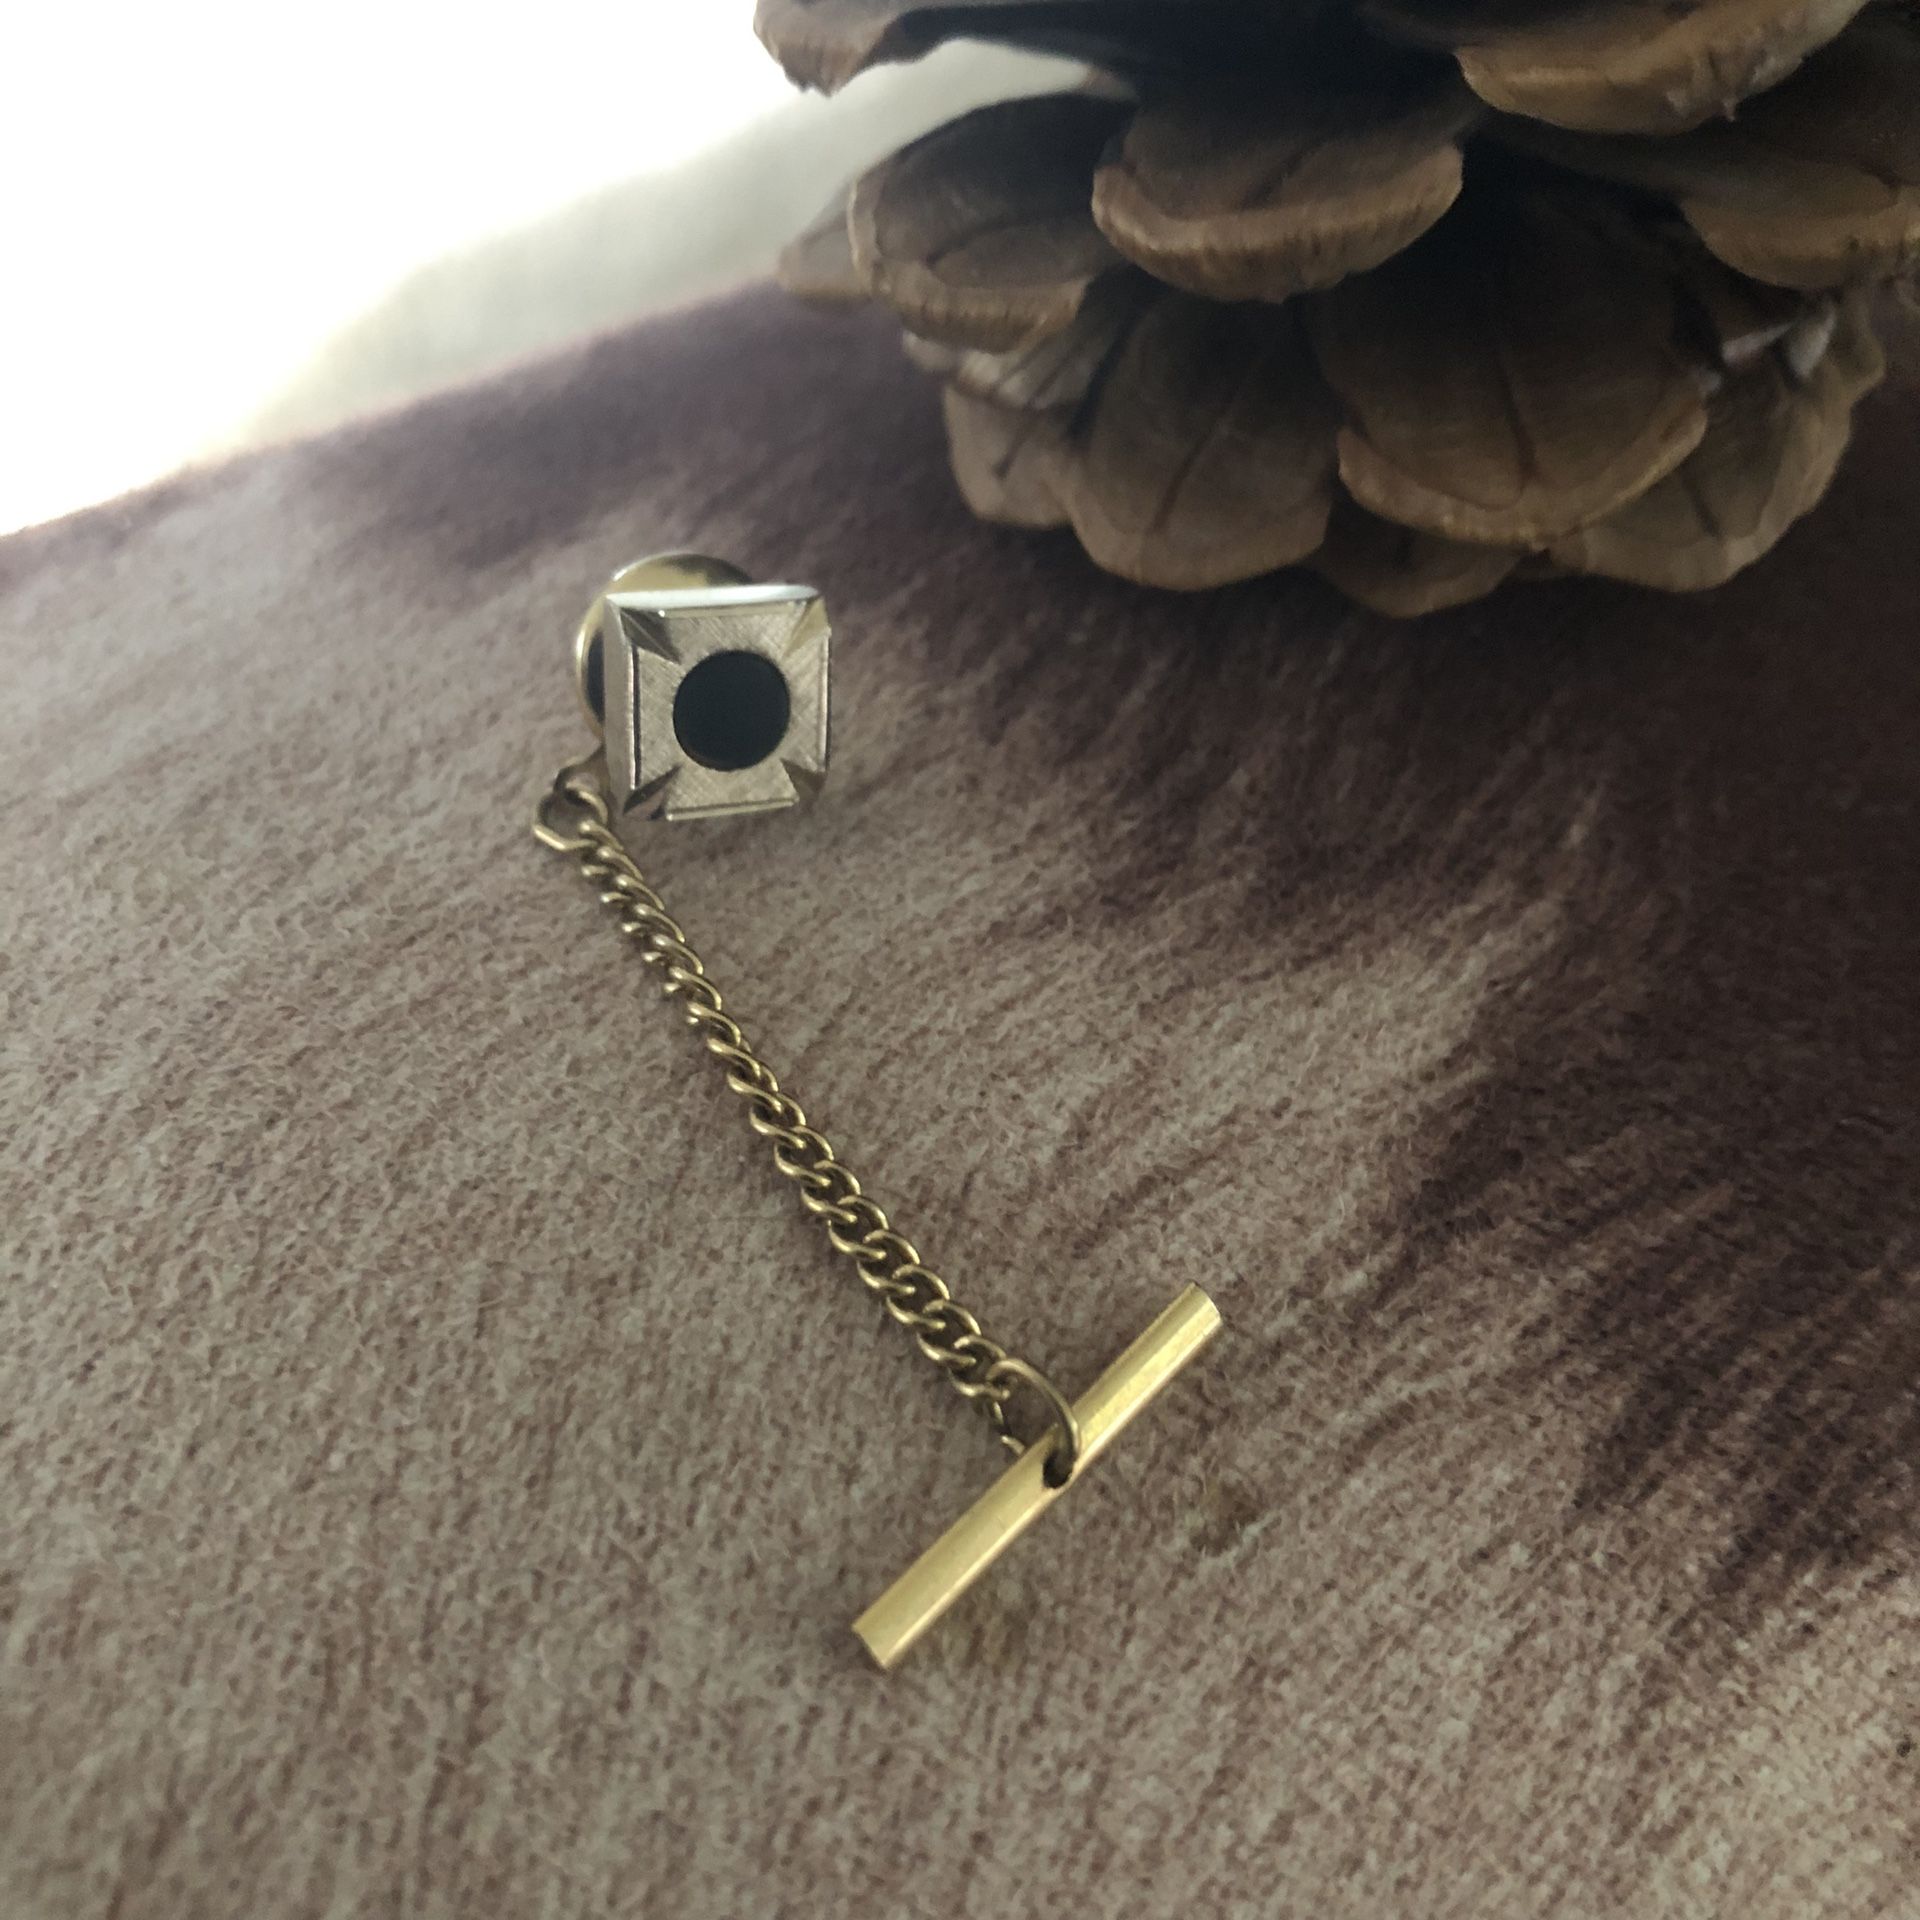 Vintage men’s gold plated black onyx tie tack tie pin with chain